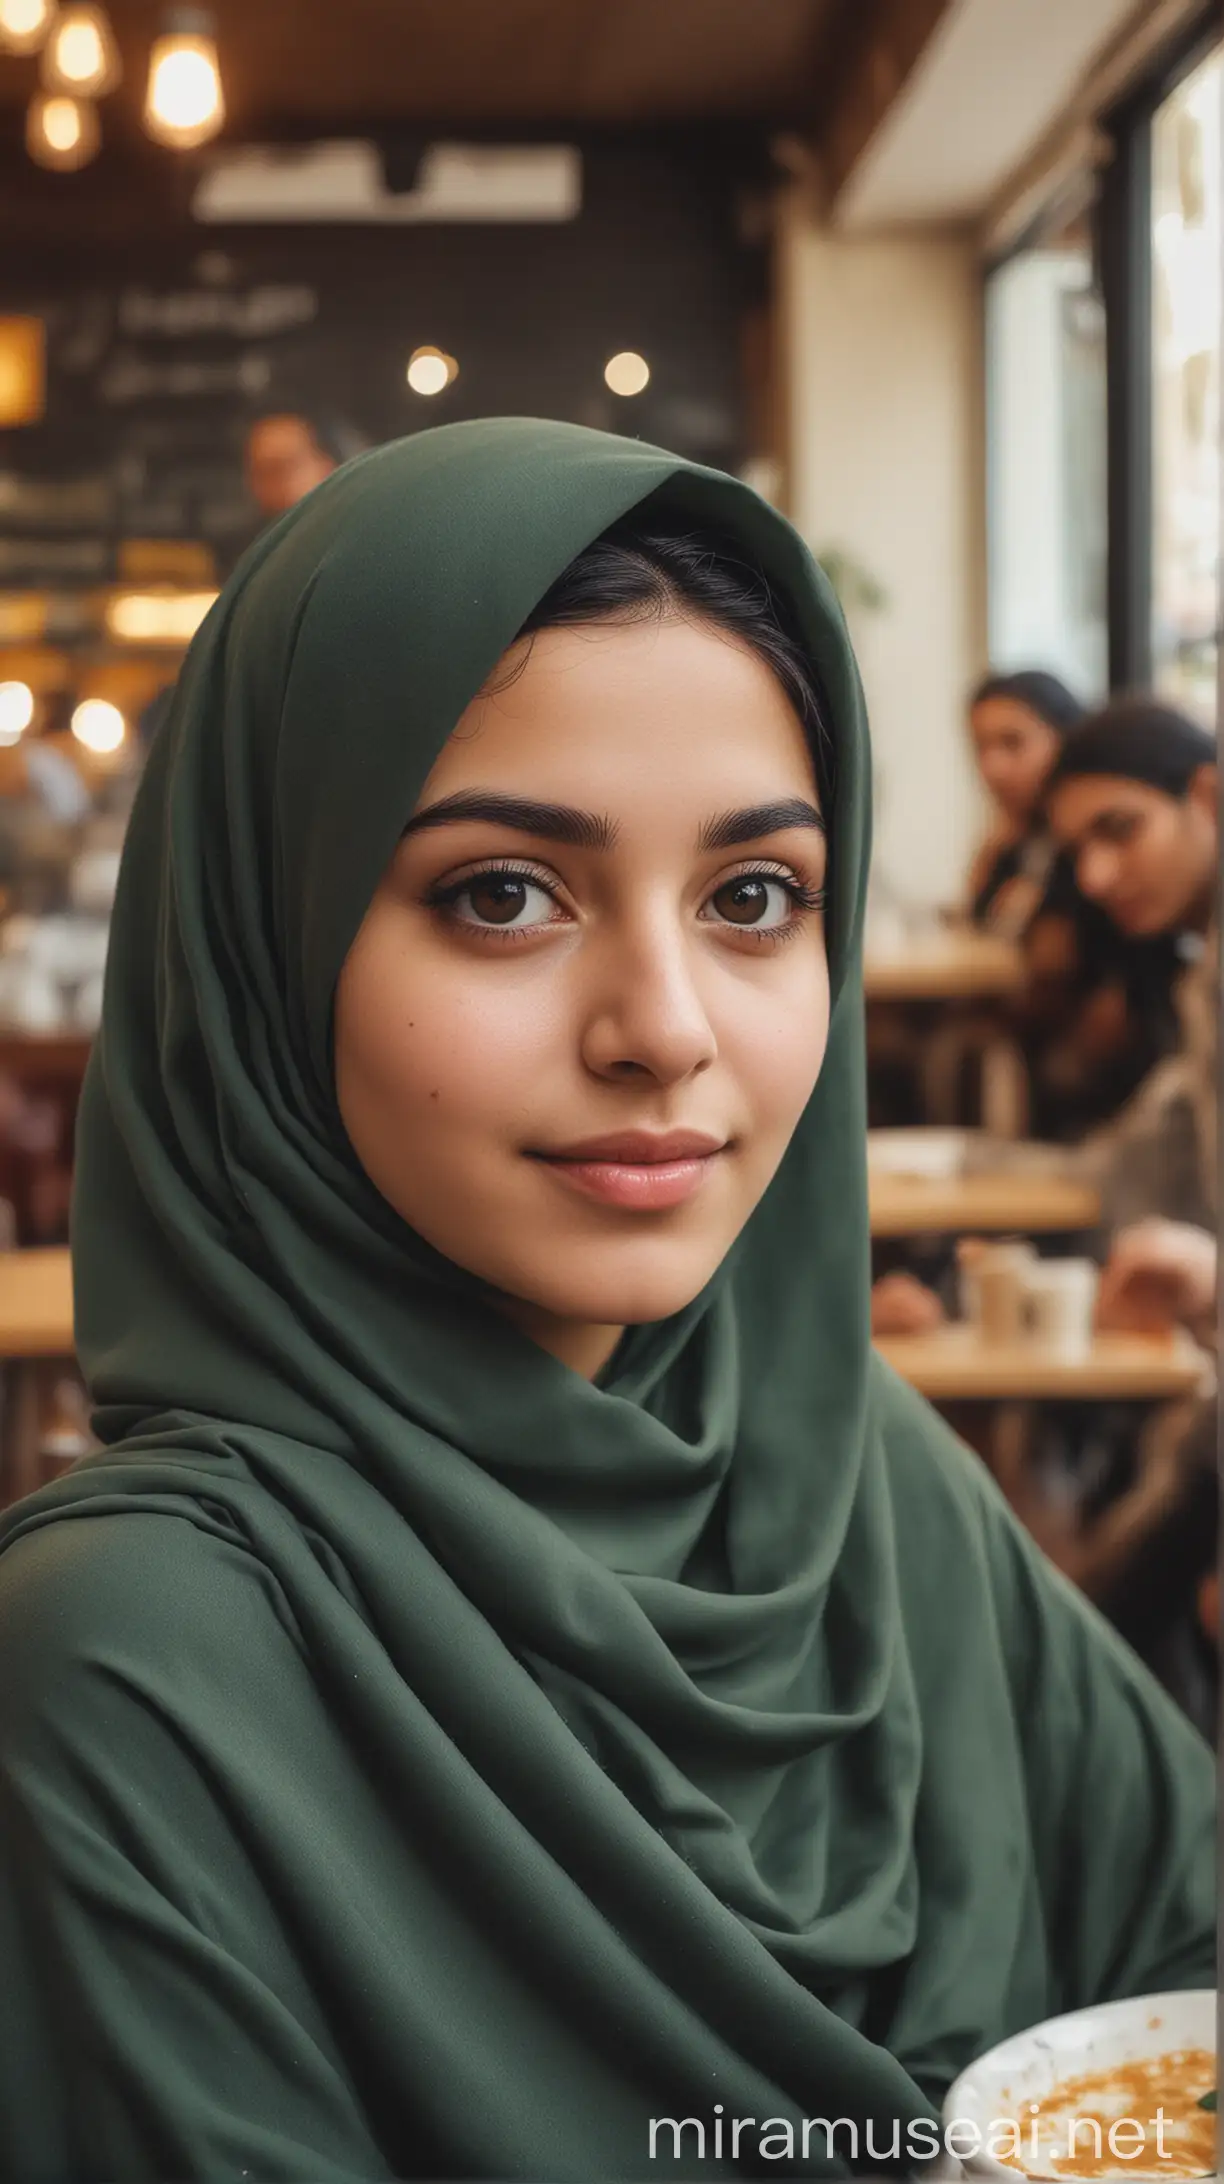 Iranian girl with hijab in a cafe